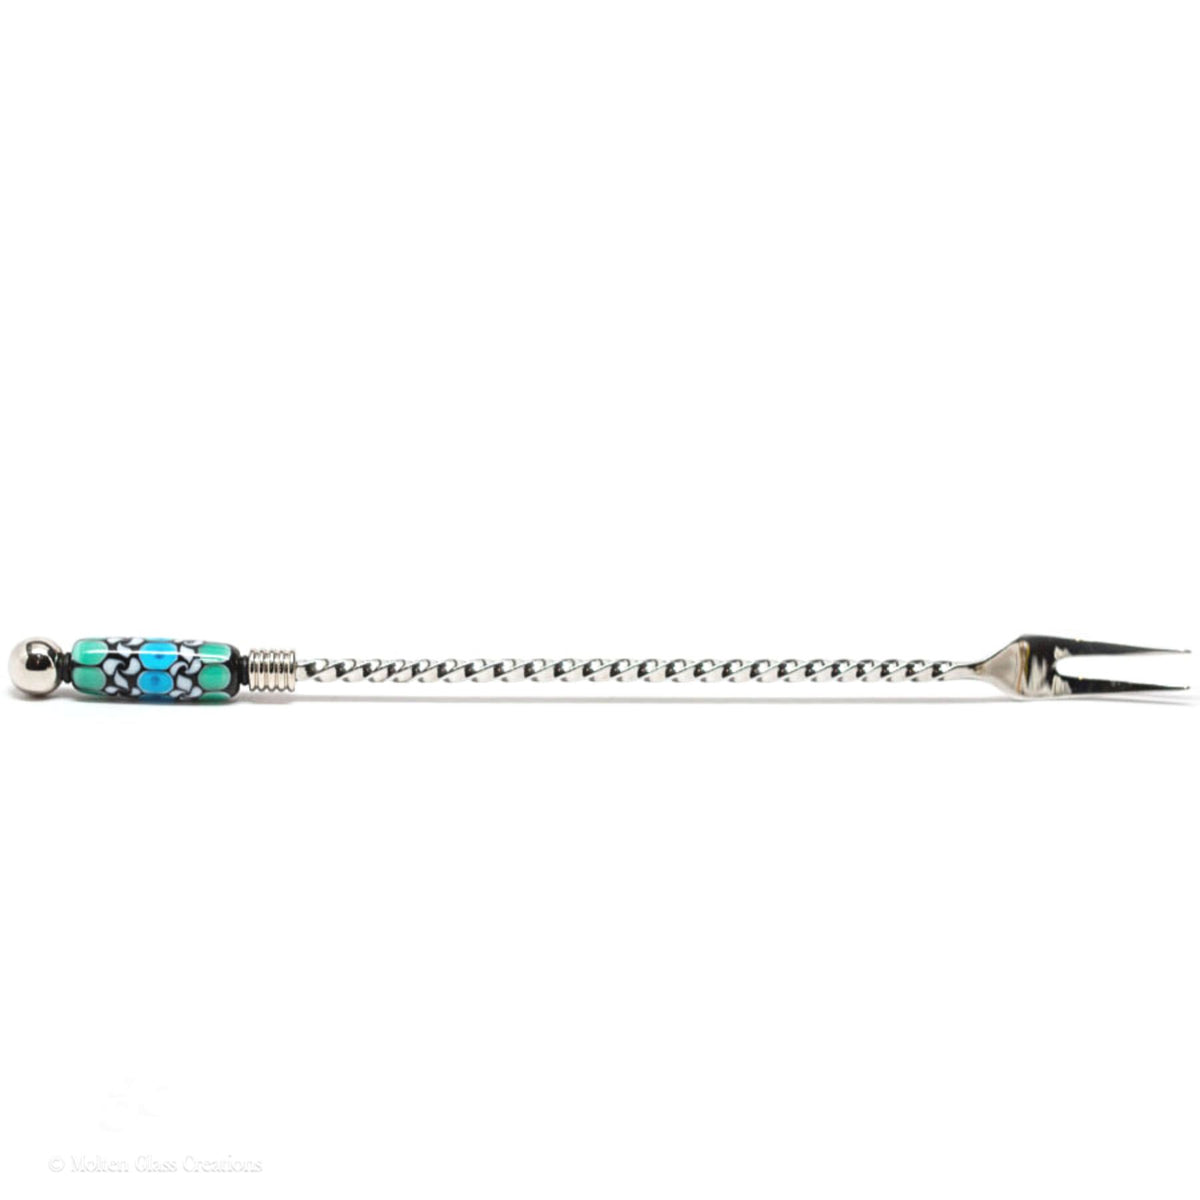 Beaded Pickle Fork - Blue and Green Pattern